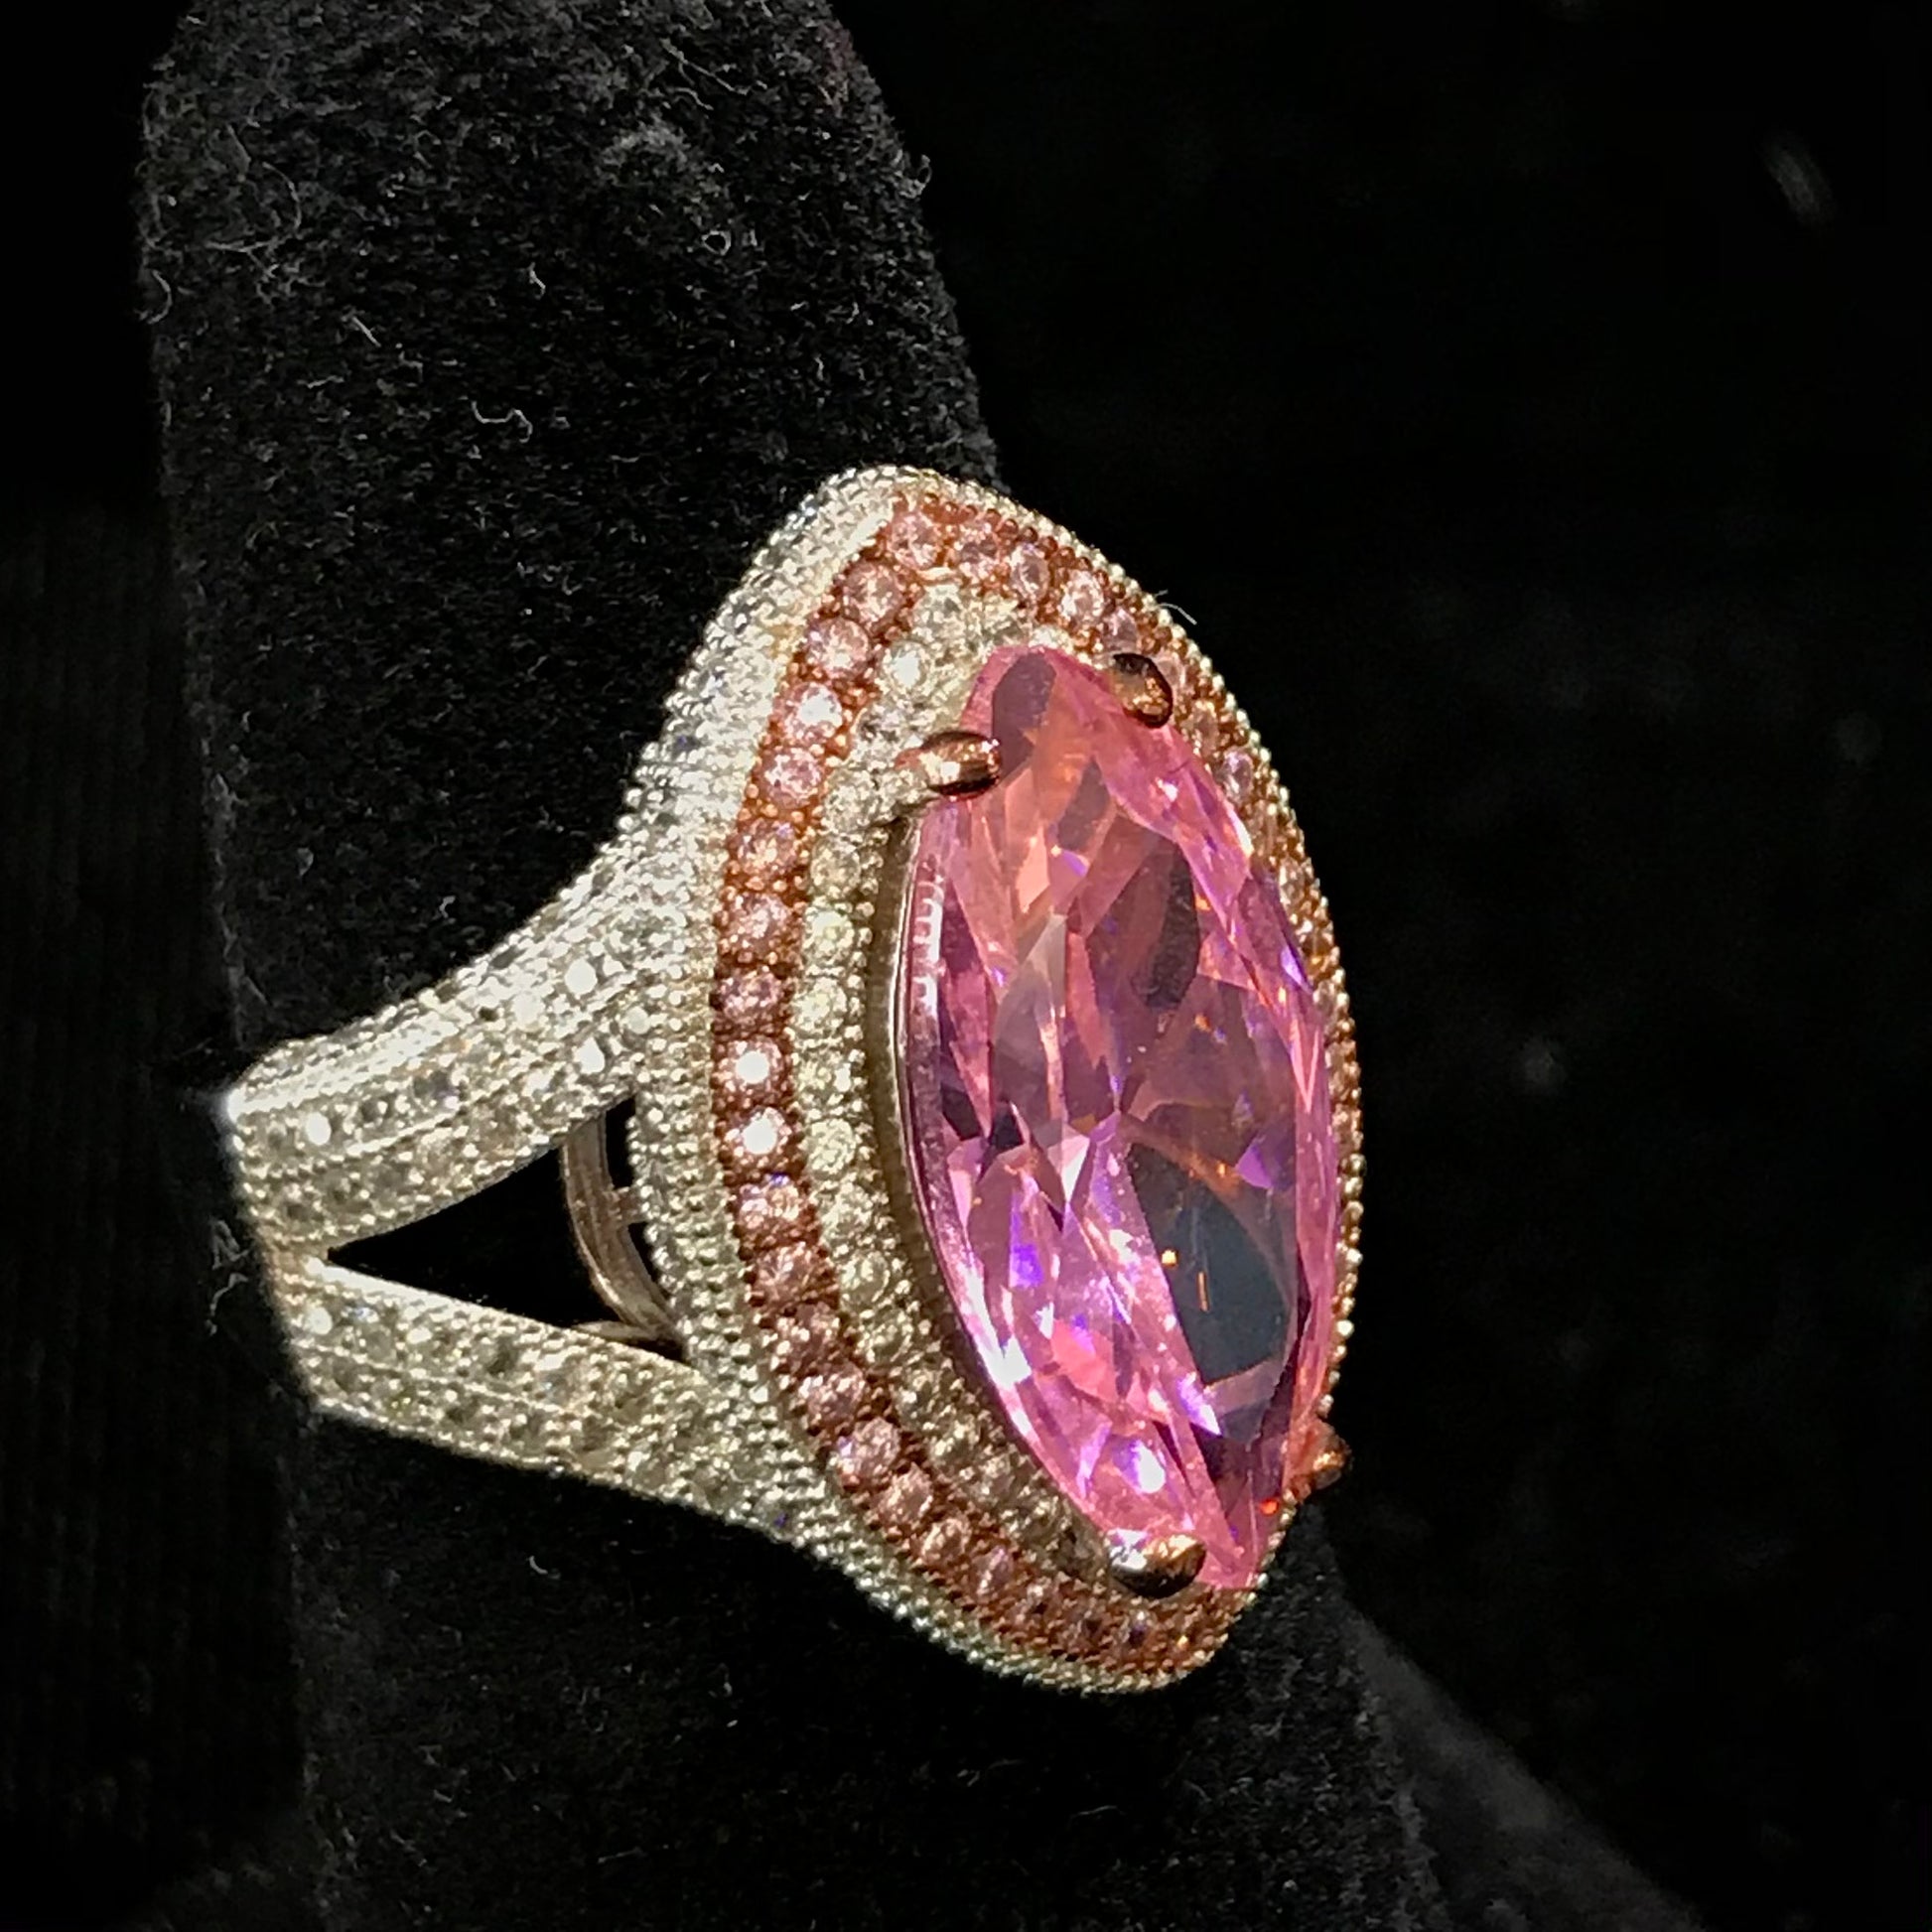 Pink marquee cubic zirconia ring set in sterling silver.